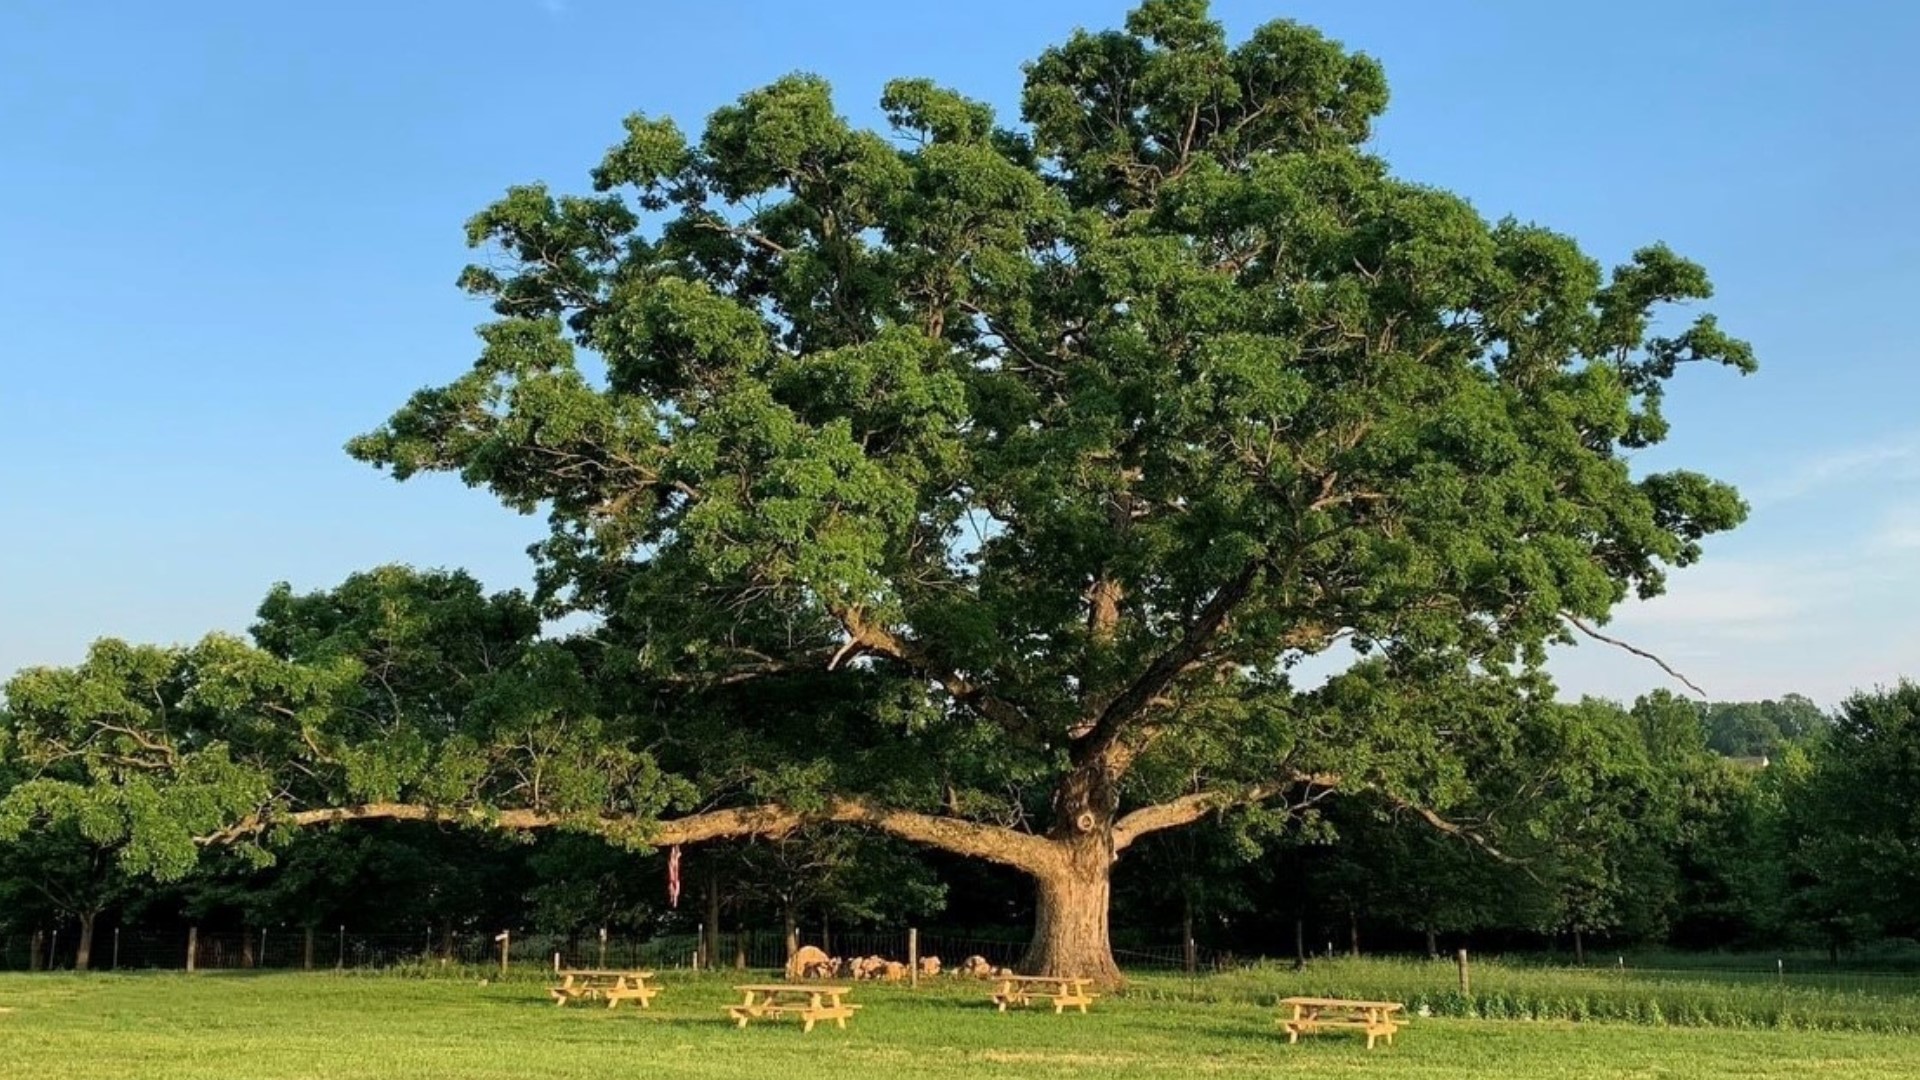 Last week's winds took down the more than 200-year-old Lone Oak.